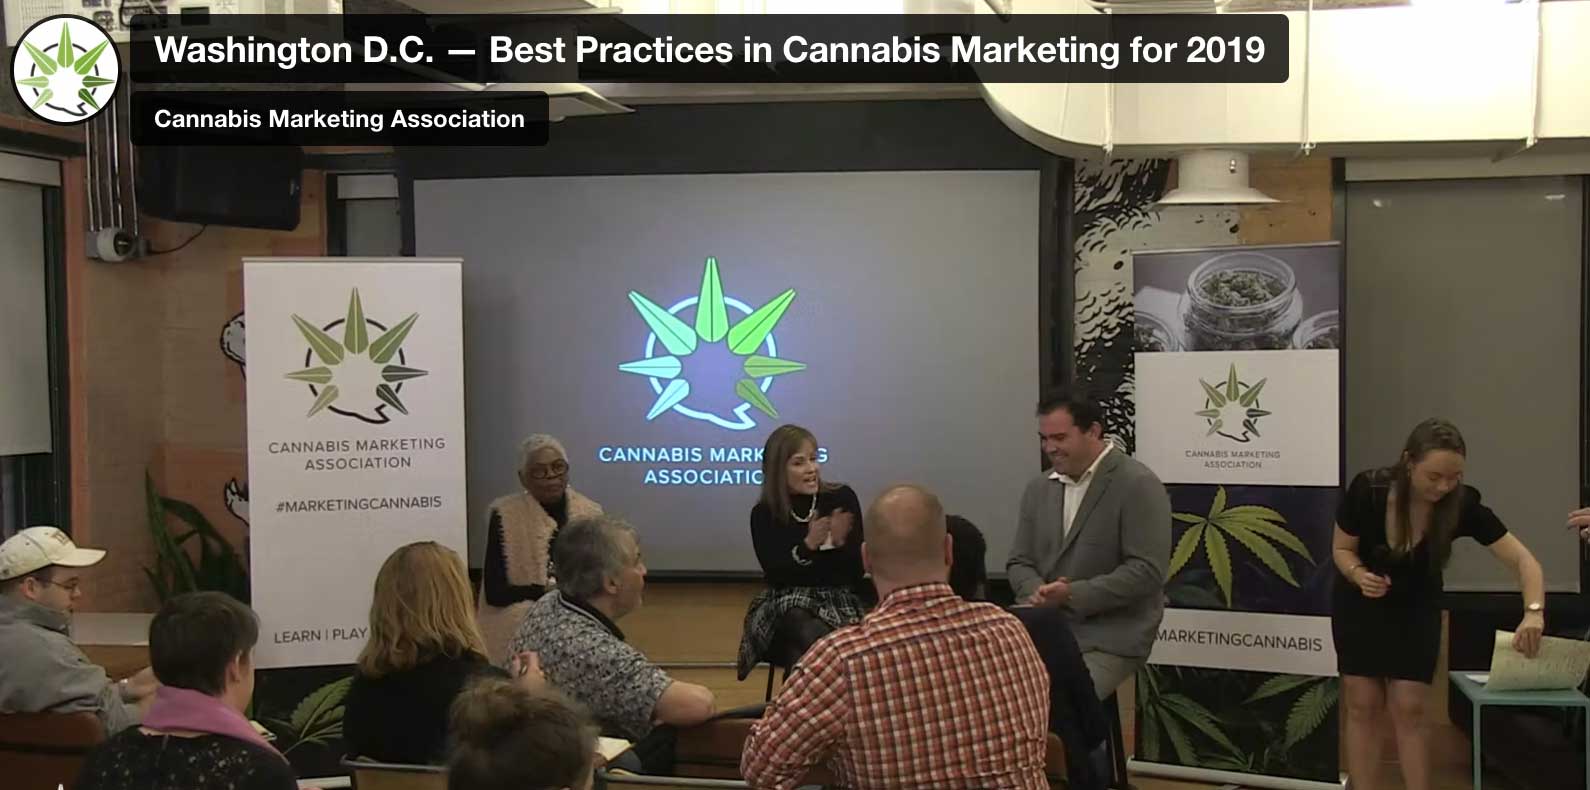 CMA: Best Practices in Cannabis Marketing for 2019, Washington DC